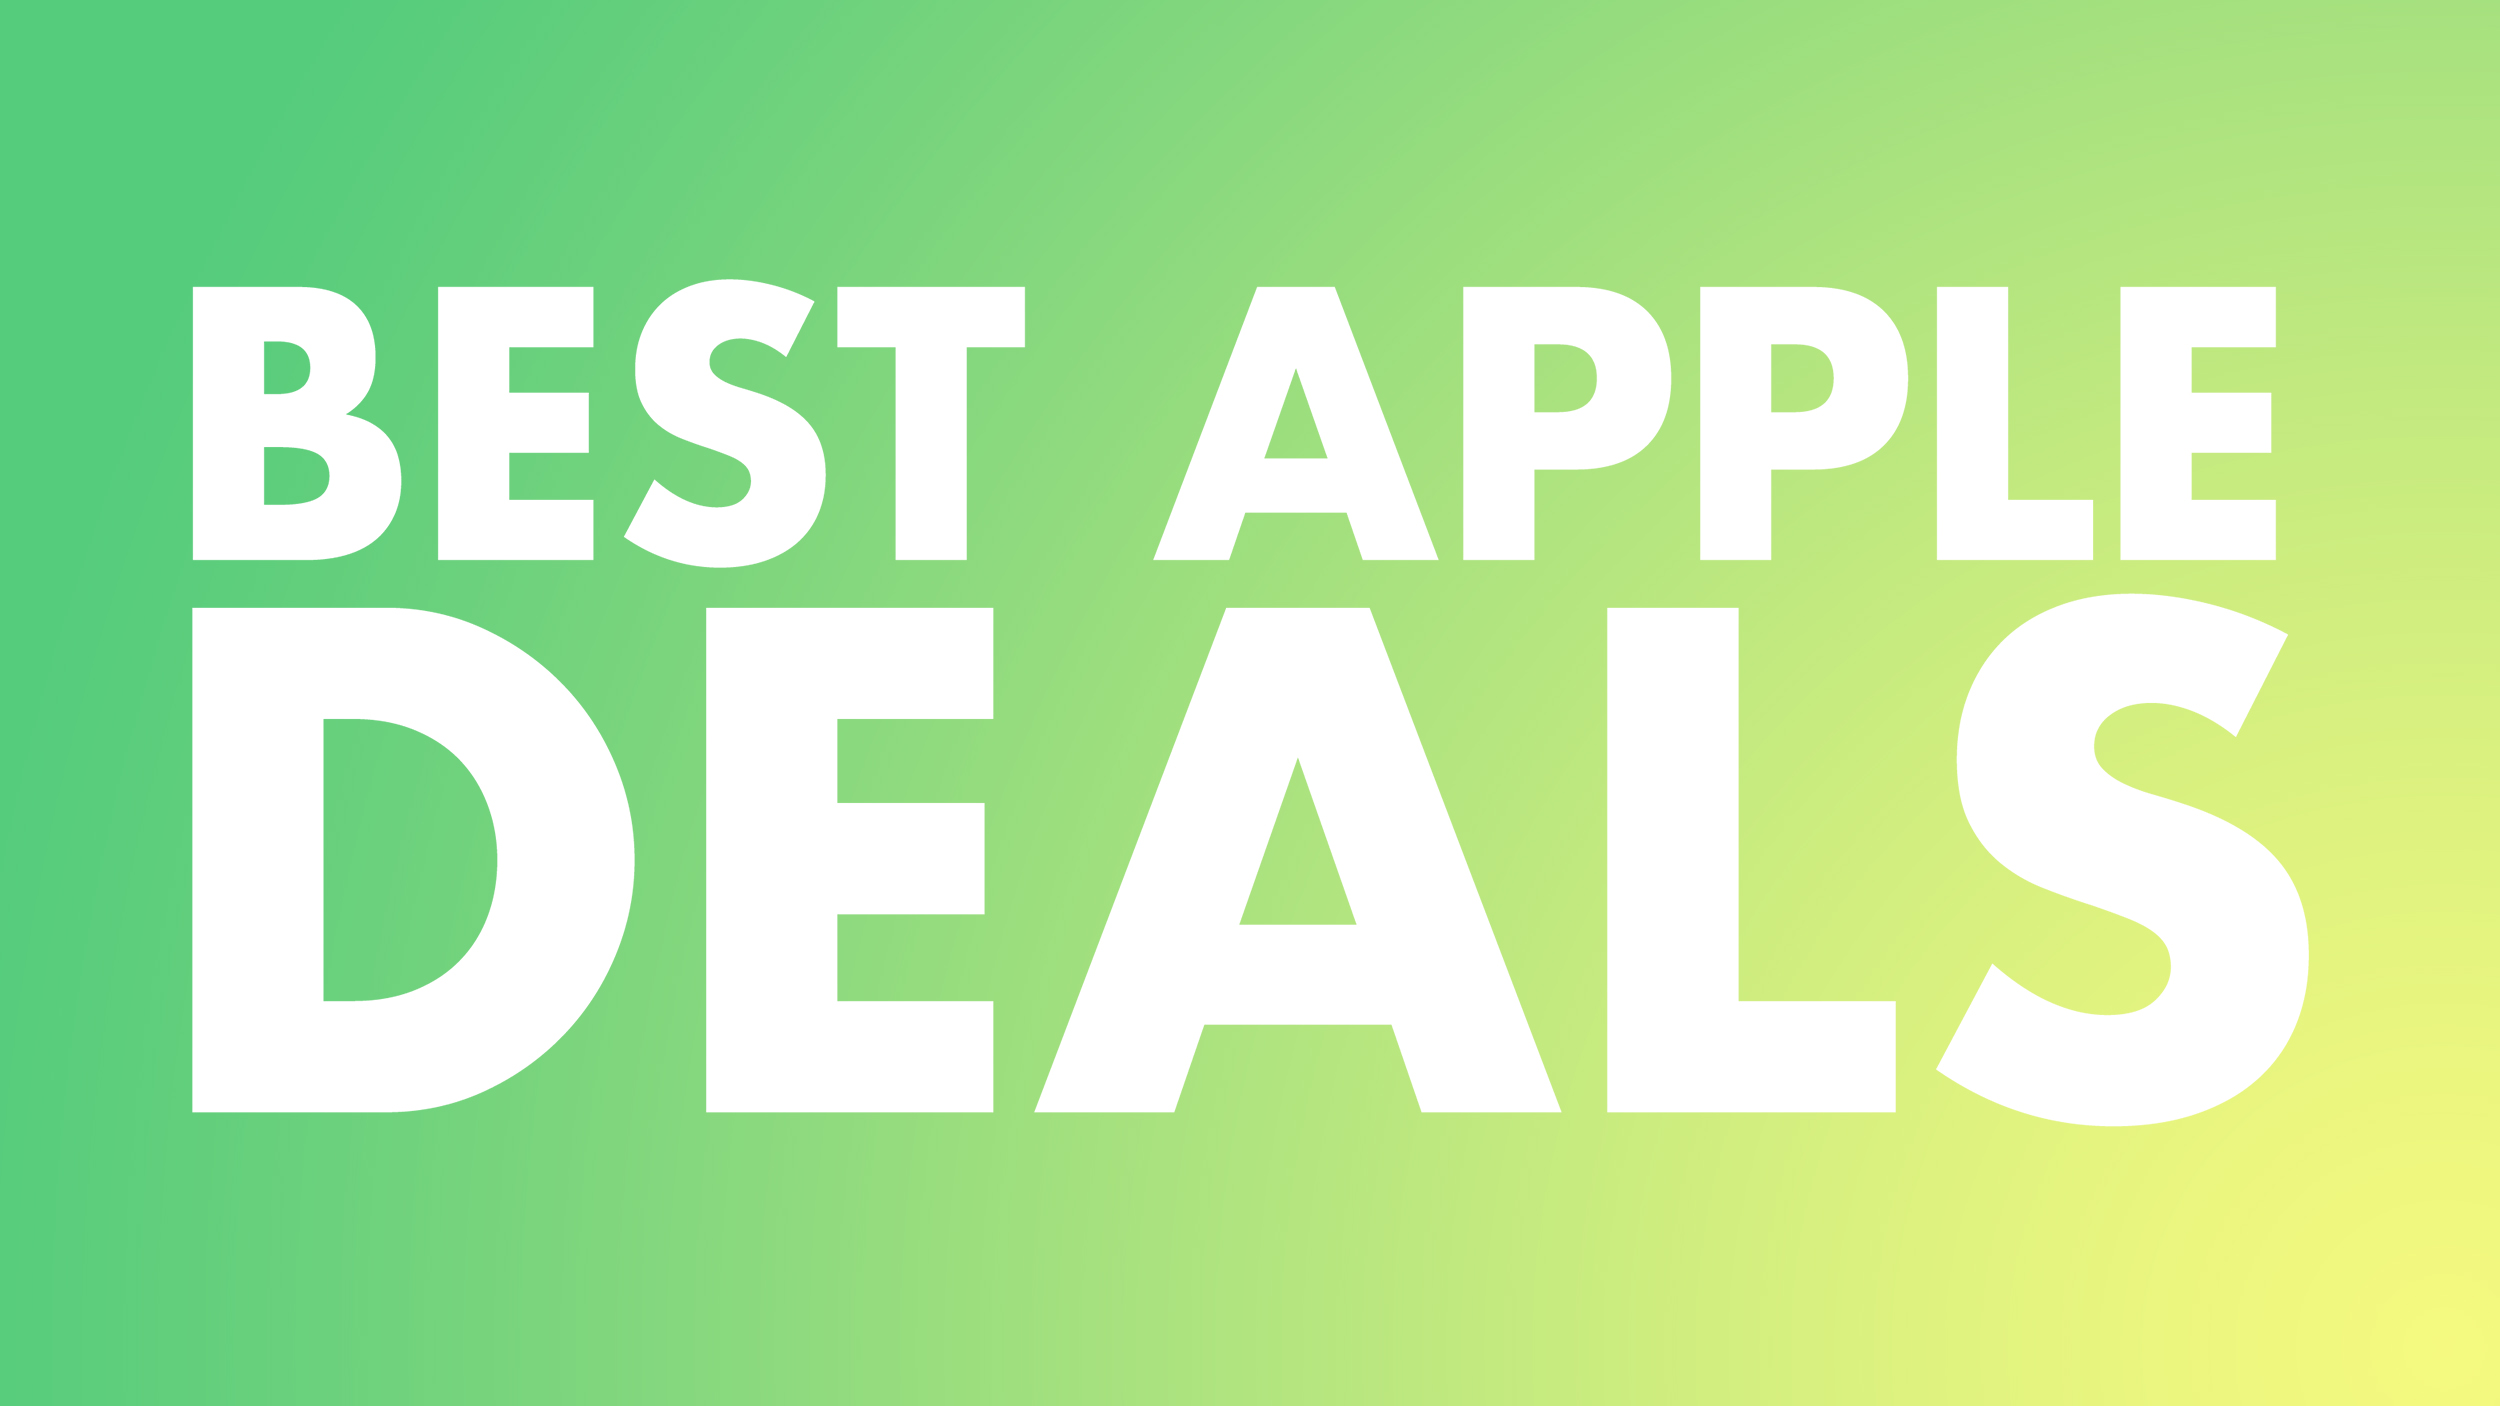 Best Apple Deals of the Week: Get Up to 25% Off Popular Apple Accessories From Anker and Nomad